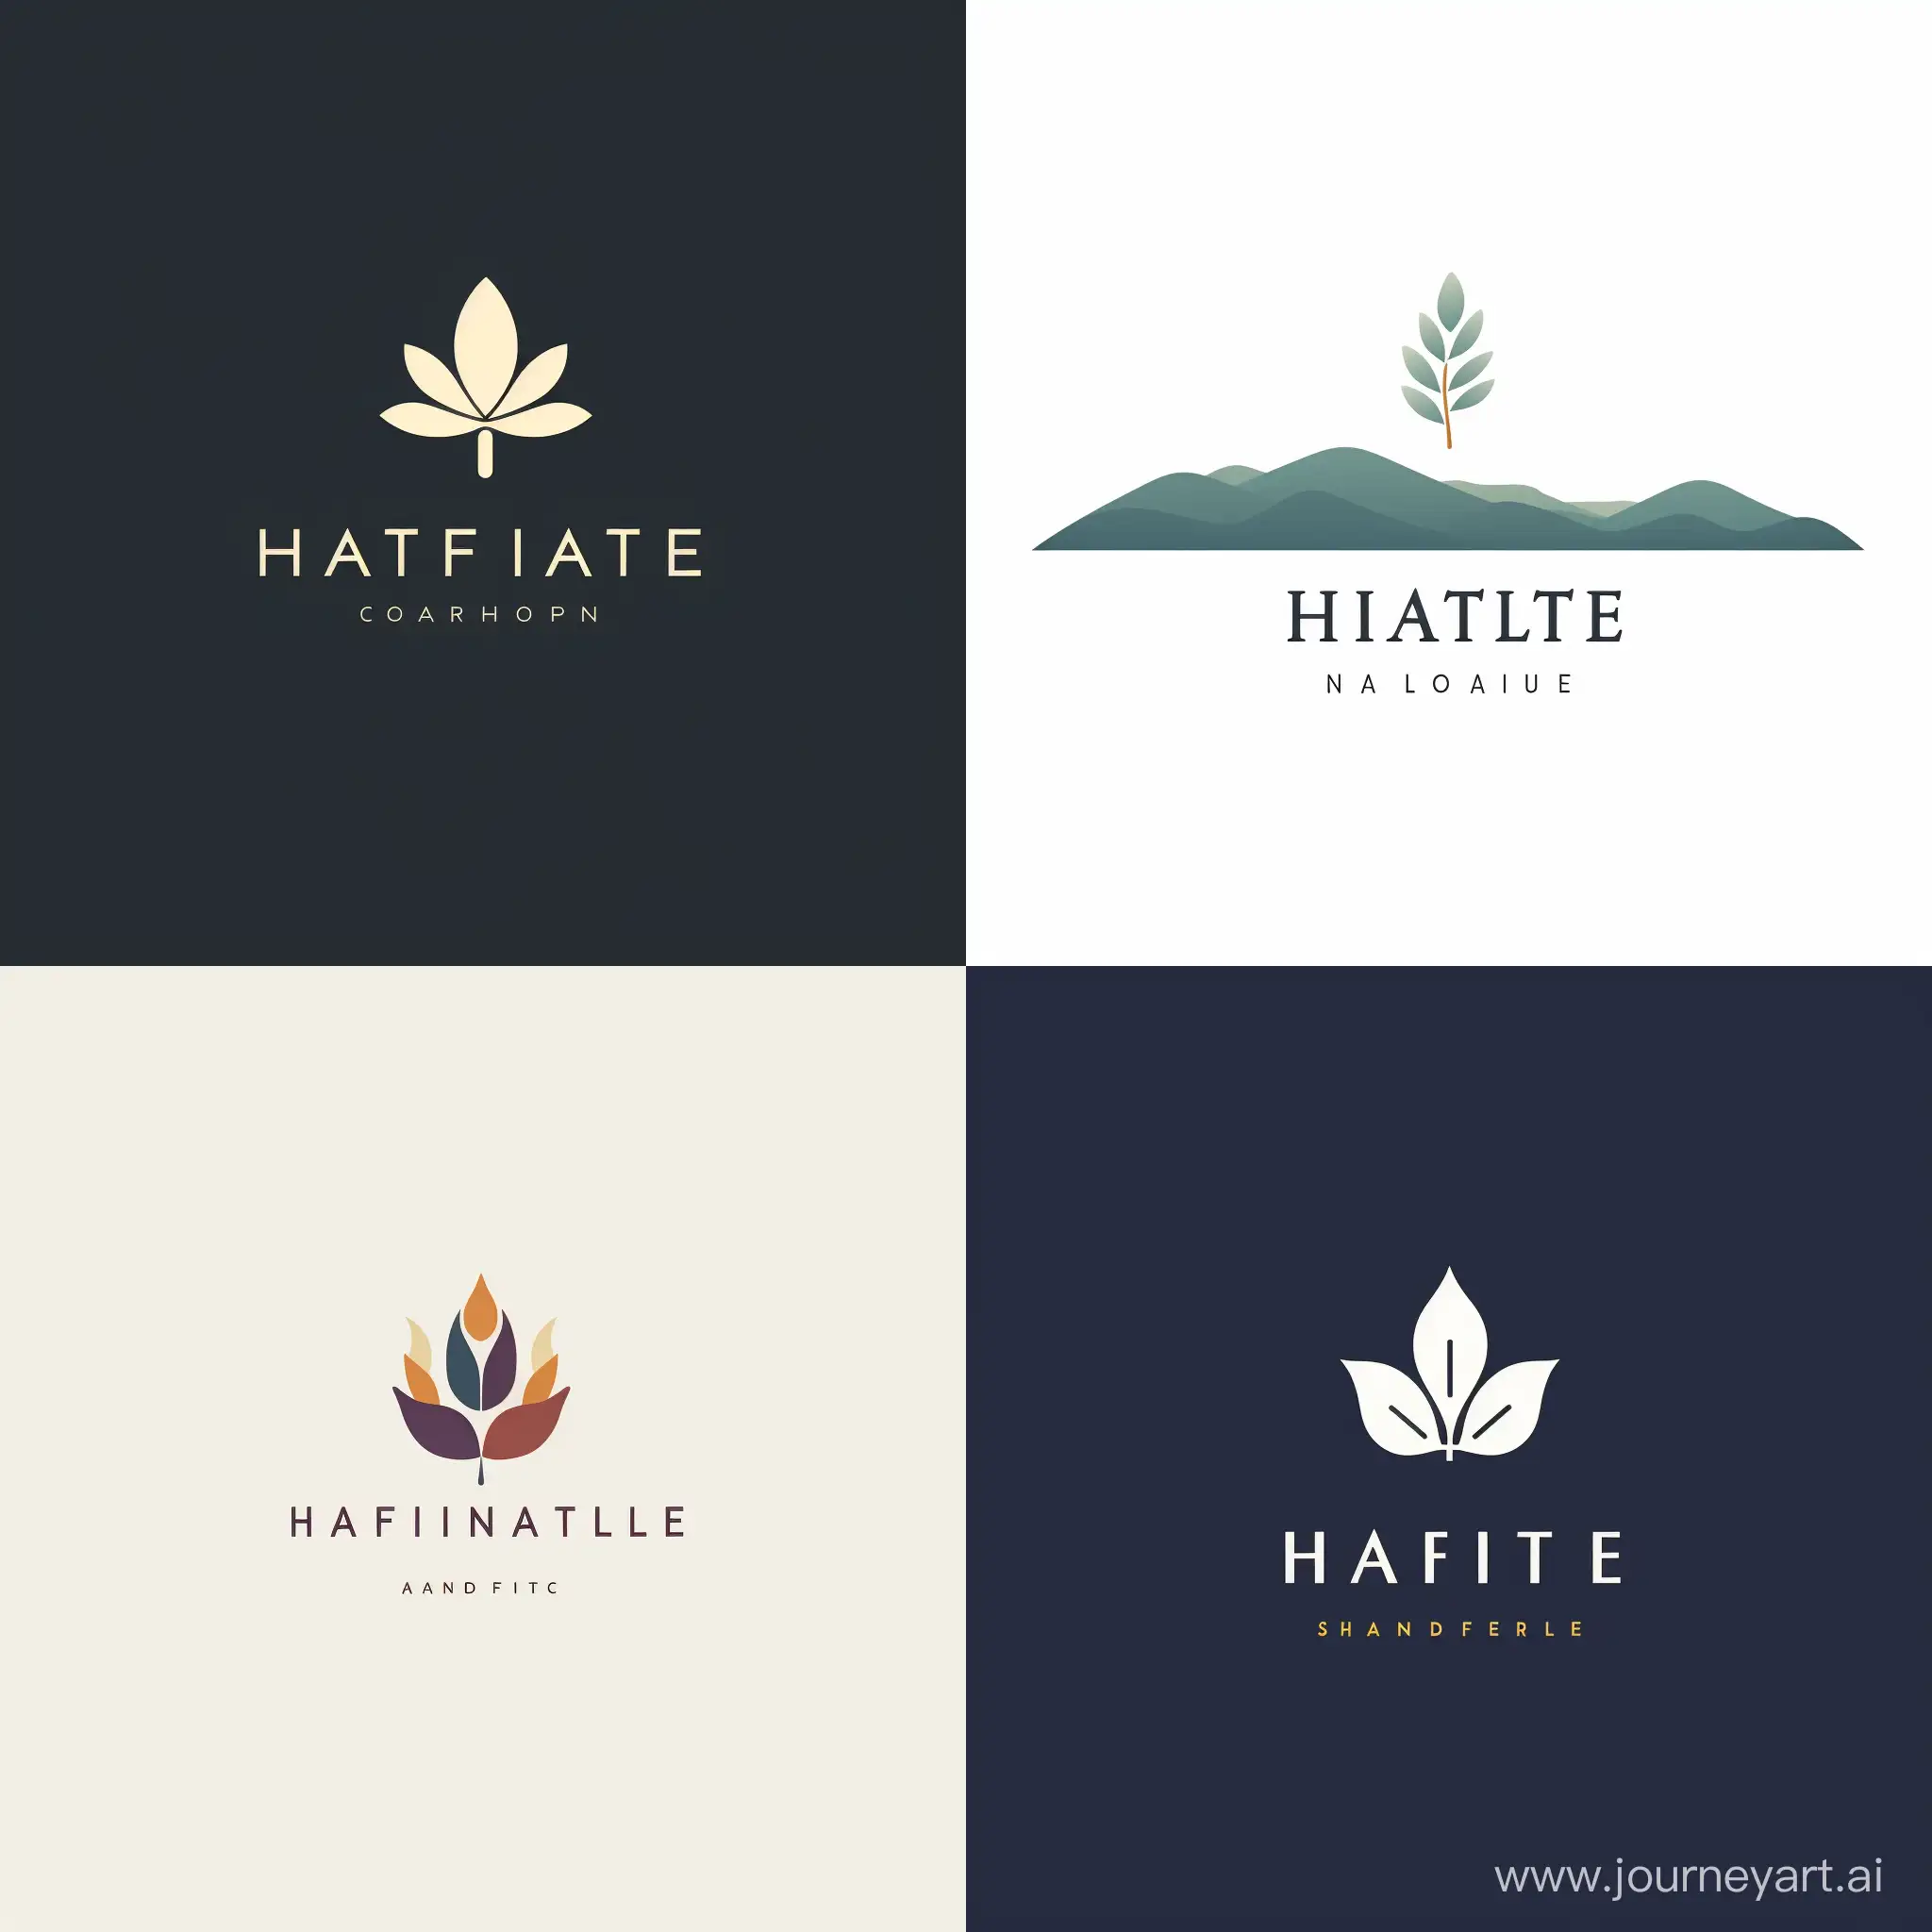 Create a minimalist distinctive logo for the brand called HATLife that encapsulates the essence of Harmony, Abundance, and Tranquility. Employ minimalistic yet powerful imagery, intertwining symbols representing each element seamlessly. Choose a sophisticated color palette to convey a sense of balance and elevate the brand's identity, evoking a harmonious and prosperous lifestyle.